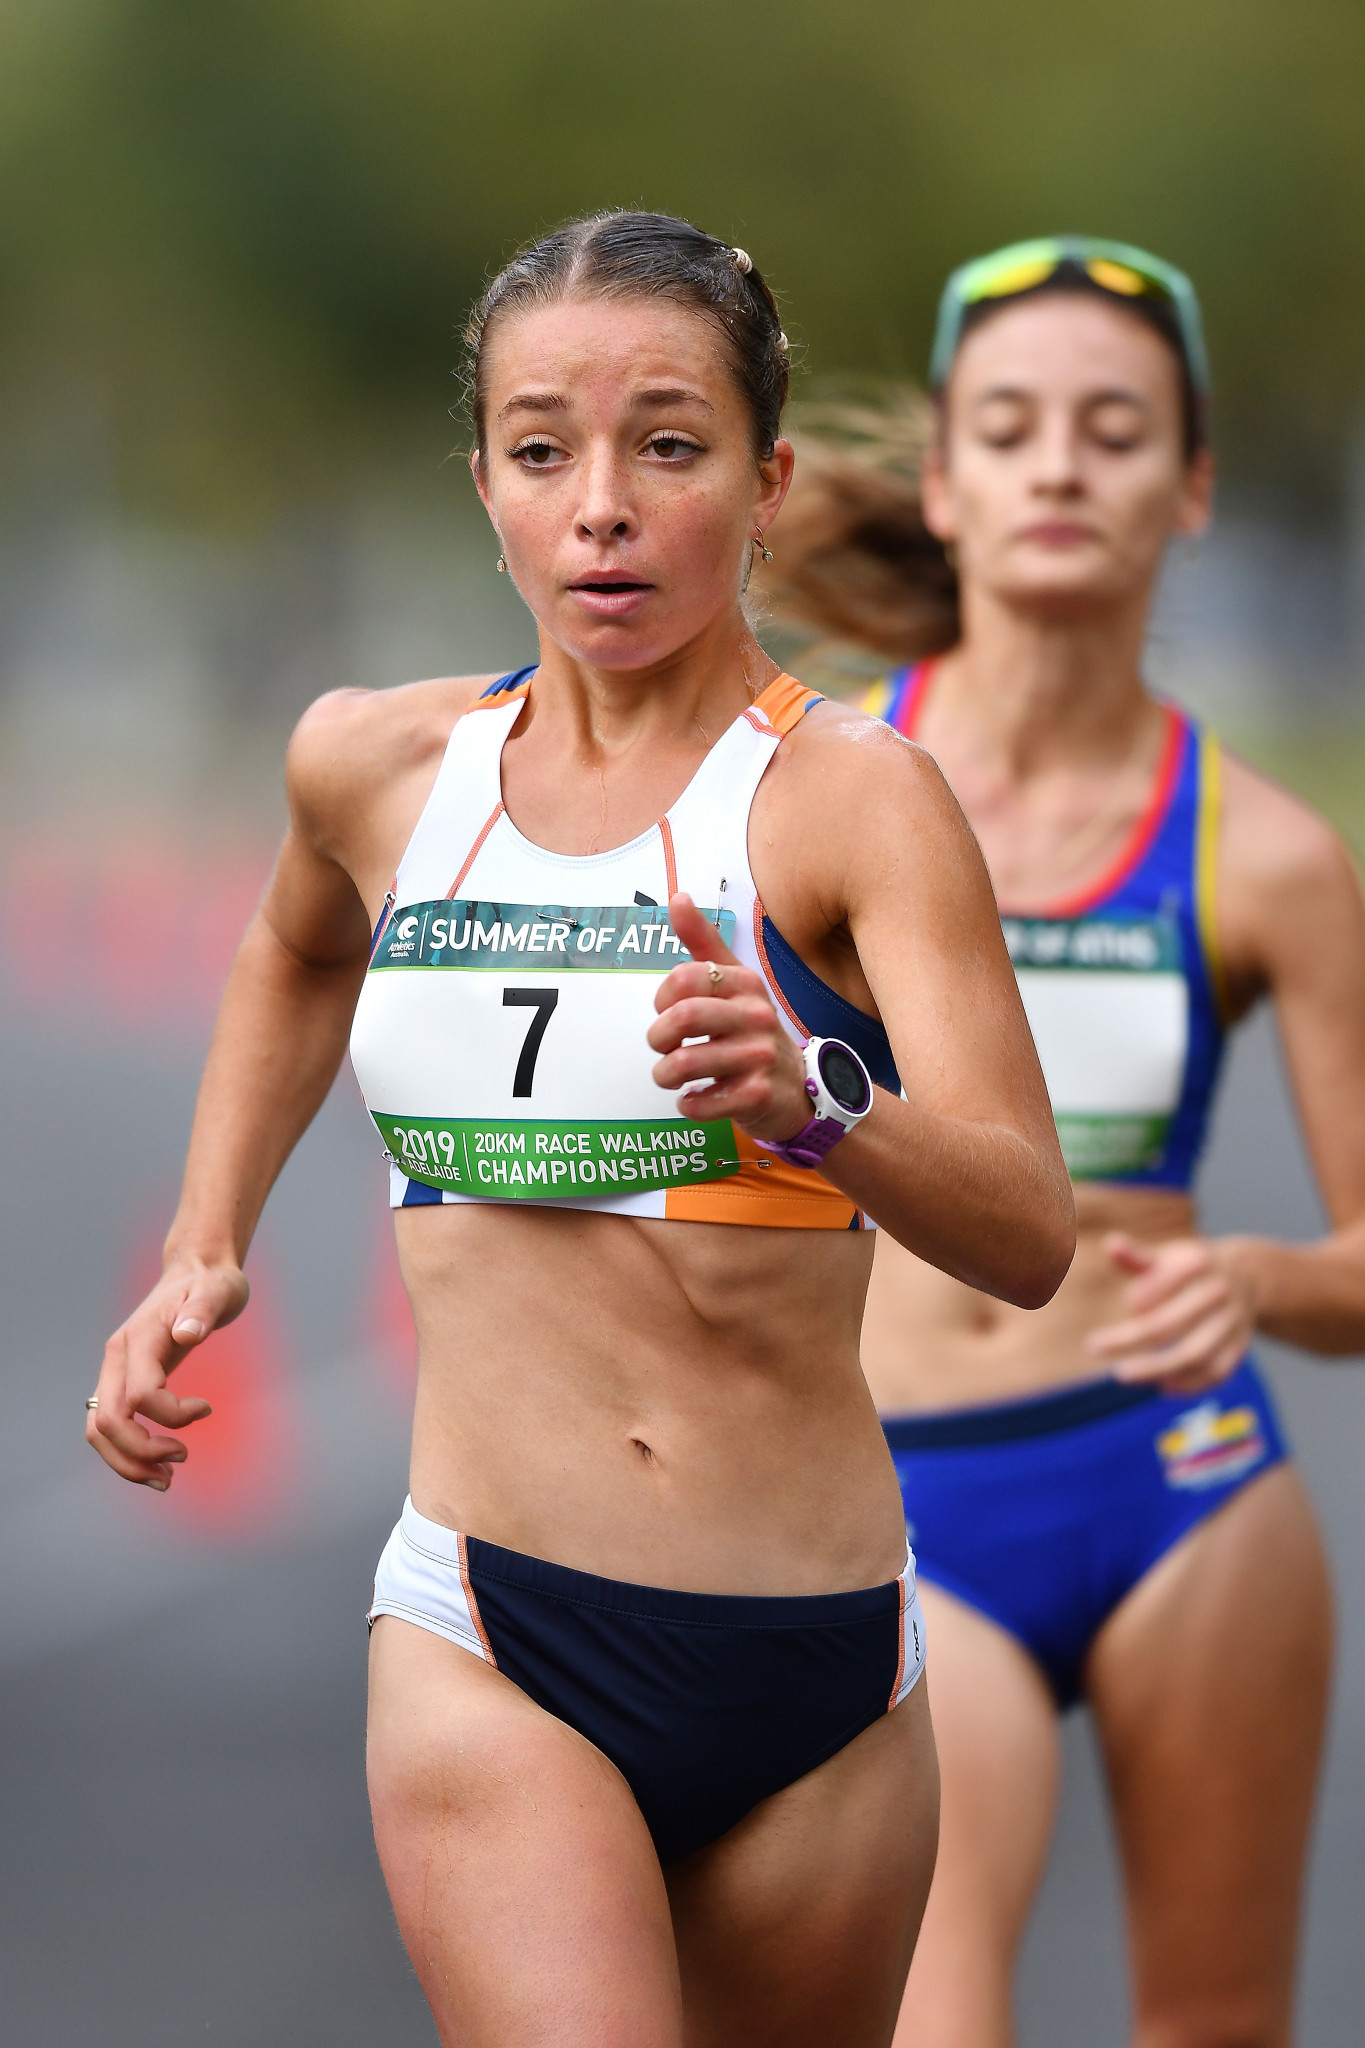 Commonwealth Games 20 kilometres racewalk champion Jemima Montag has been named in the Australian team for the 2019 Summer Universiade in Naples ©Getty Images